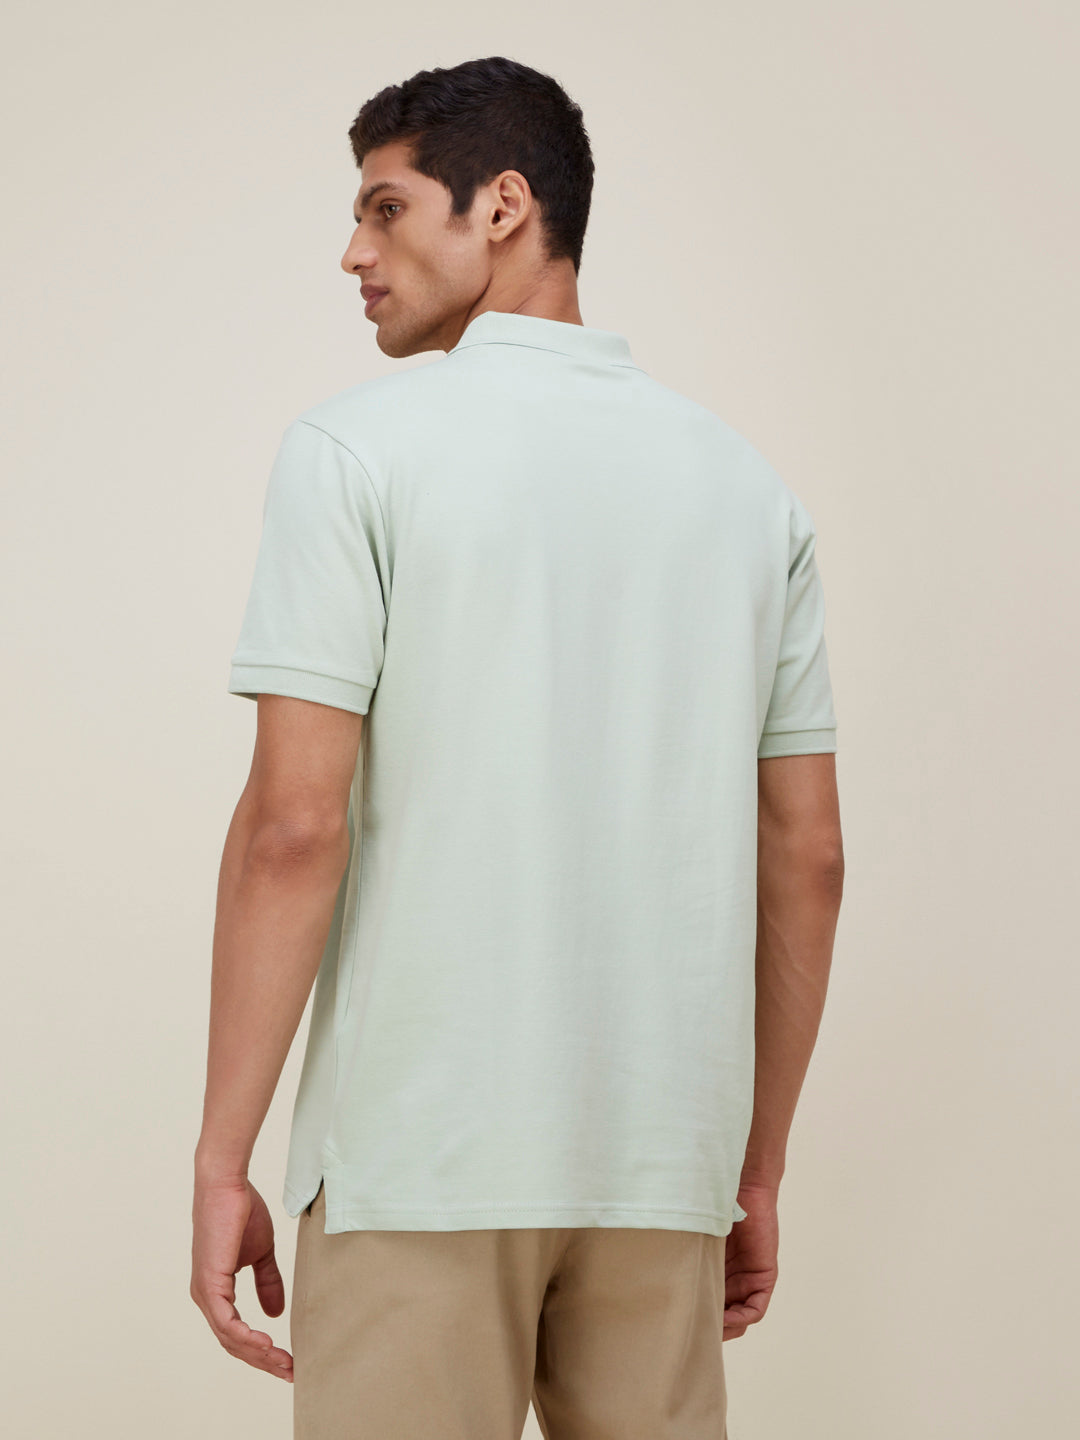 WES Casuals Sage Slim-Fit Polo T-Shirt | Sage Slim-Fit Polo T-Shirt for Men Back View - Westside